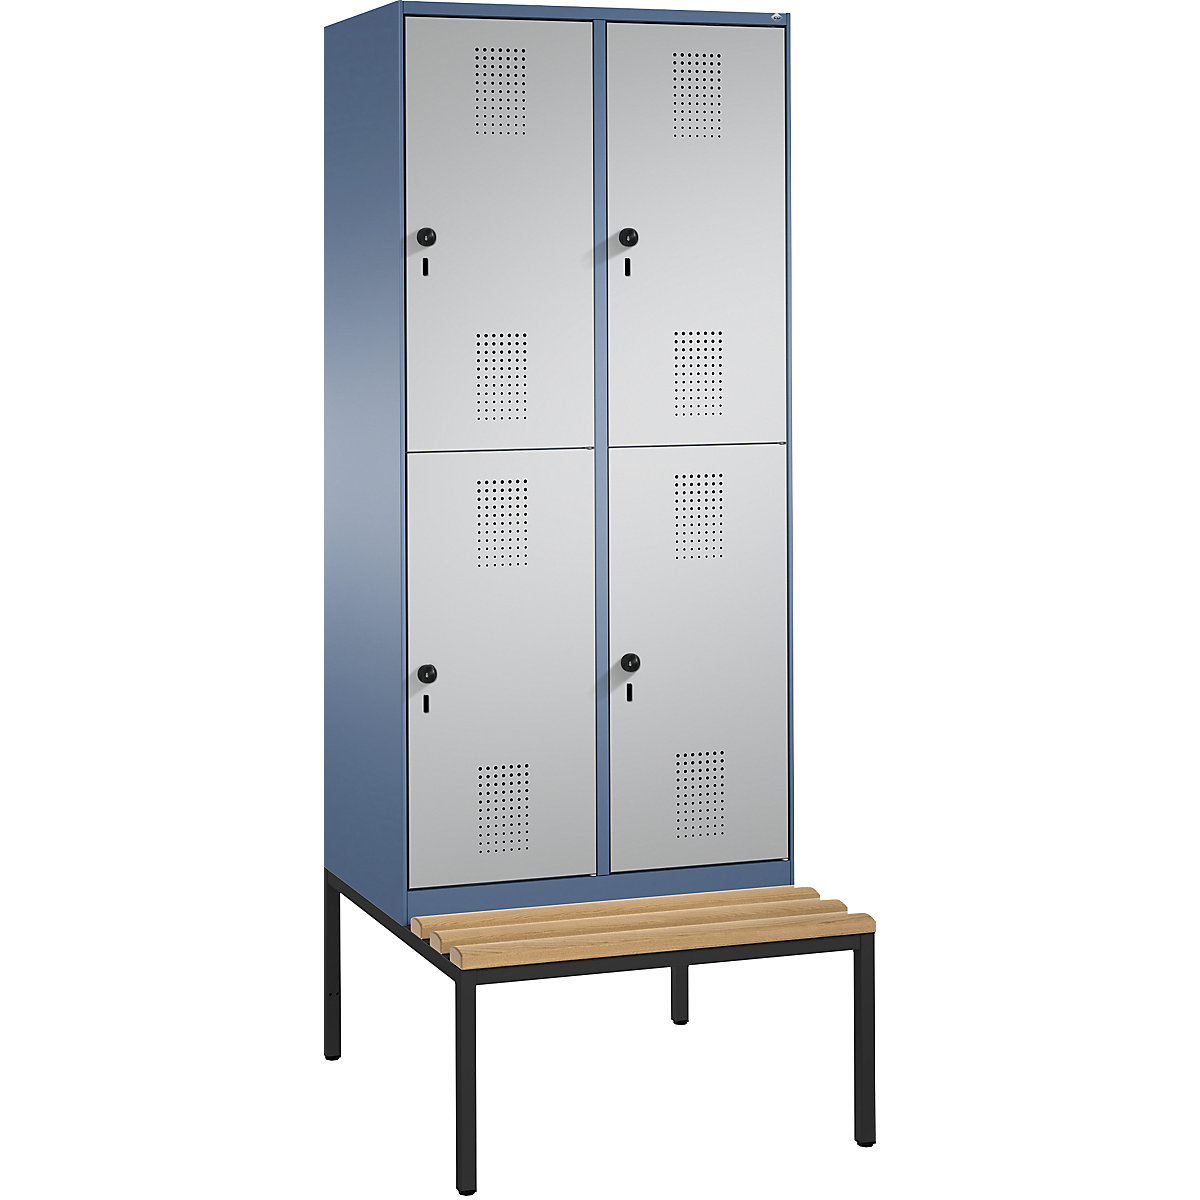 EVOLO cloakroom locker, double tier, with bench - C+P